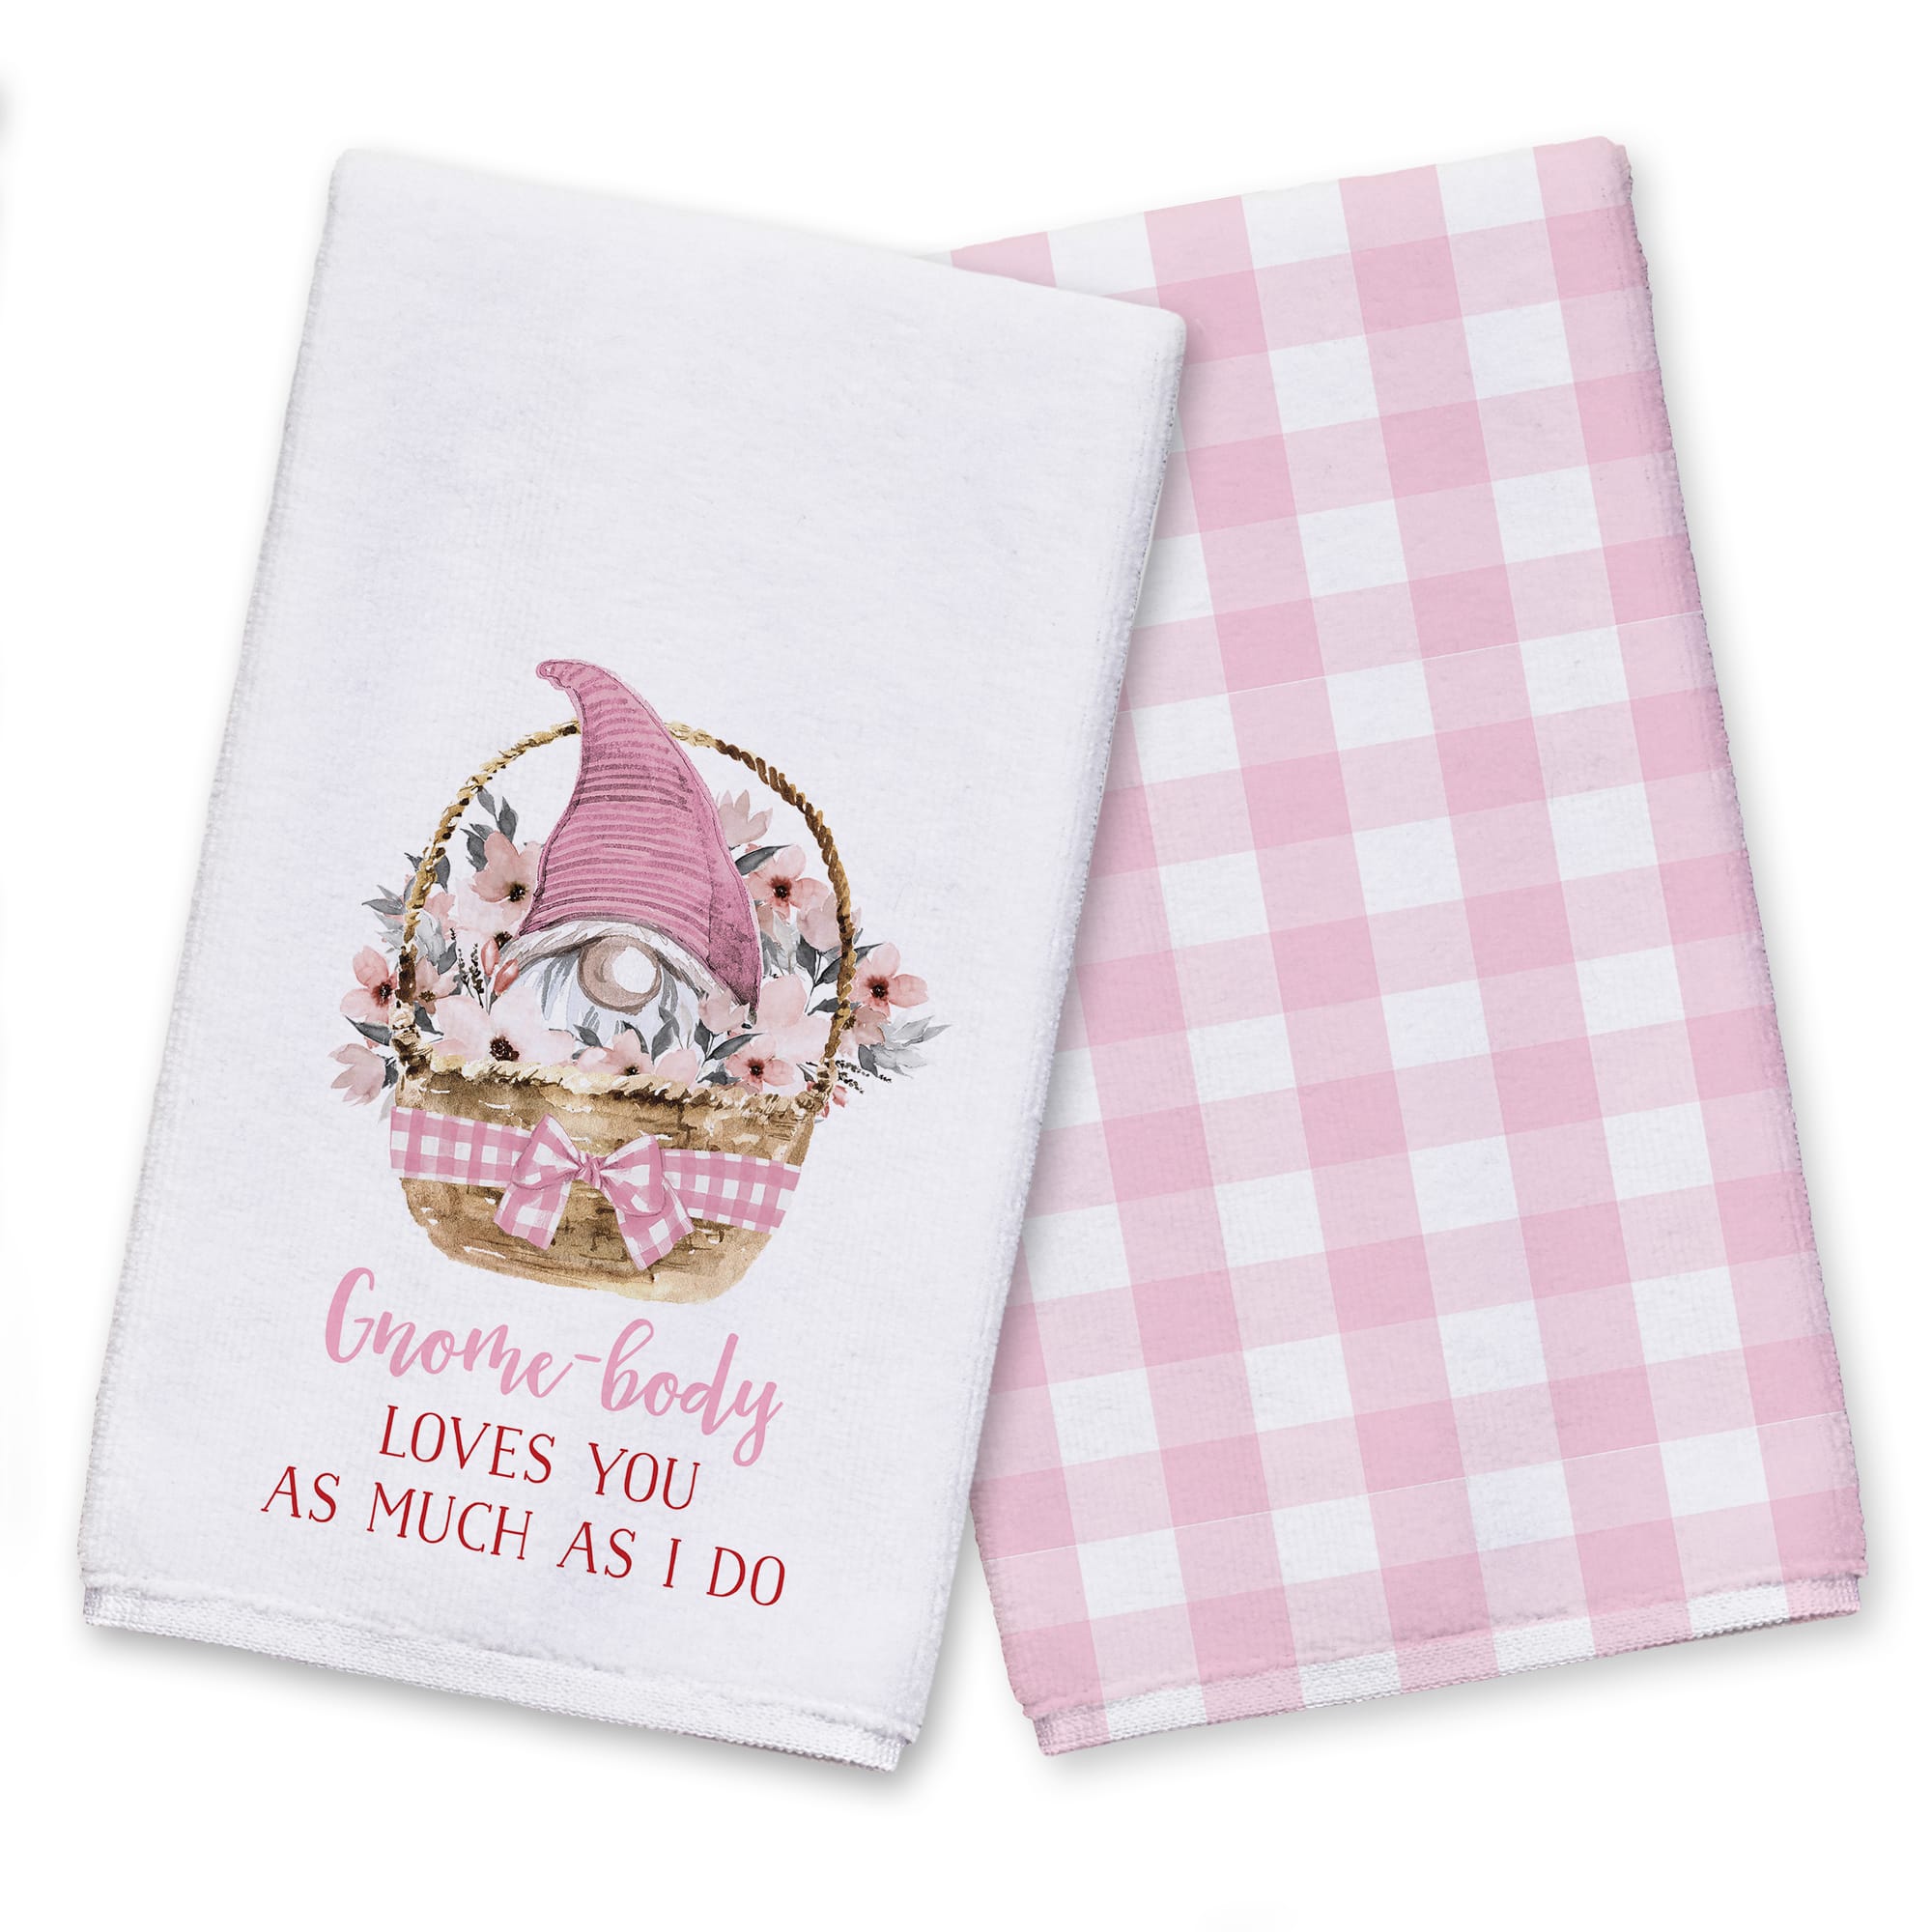 Gnome-body Loves You As Much As I Do Tea Towel Set